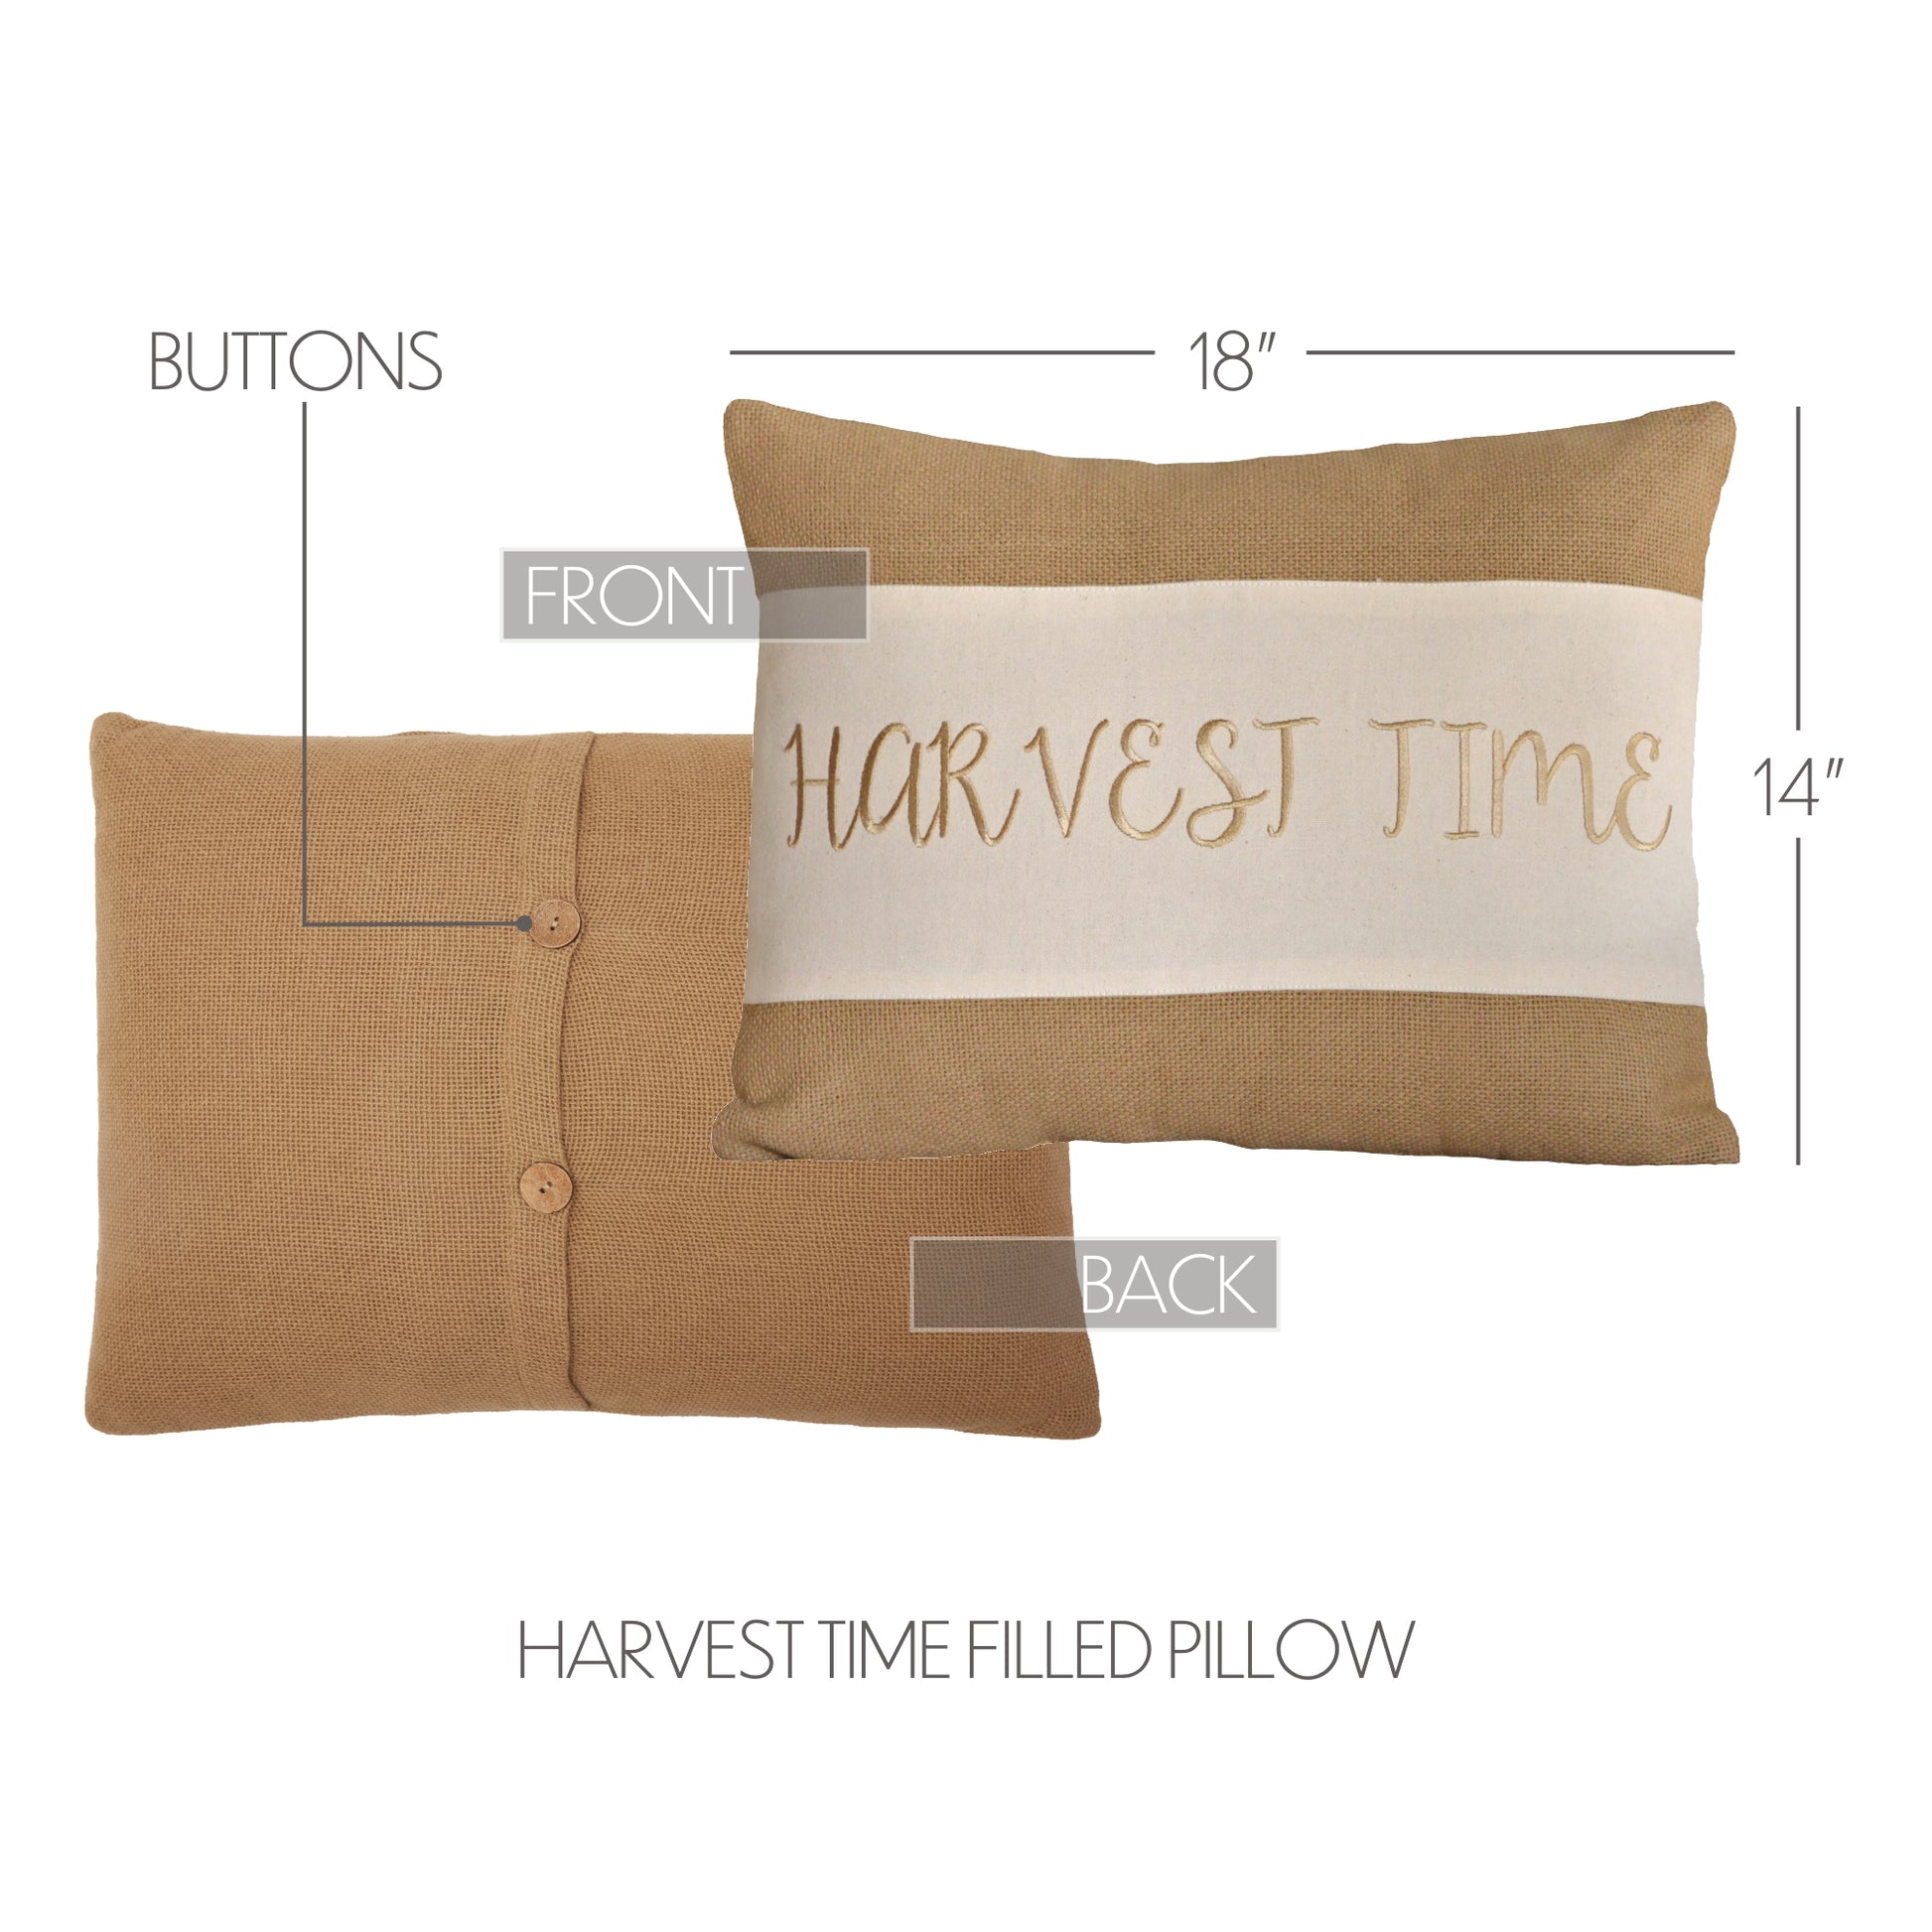 32387-Harvest-Time-Pillow-14x18-image